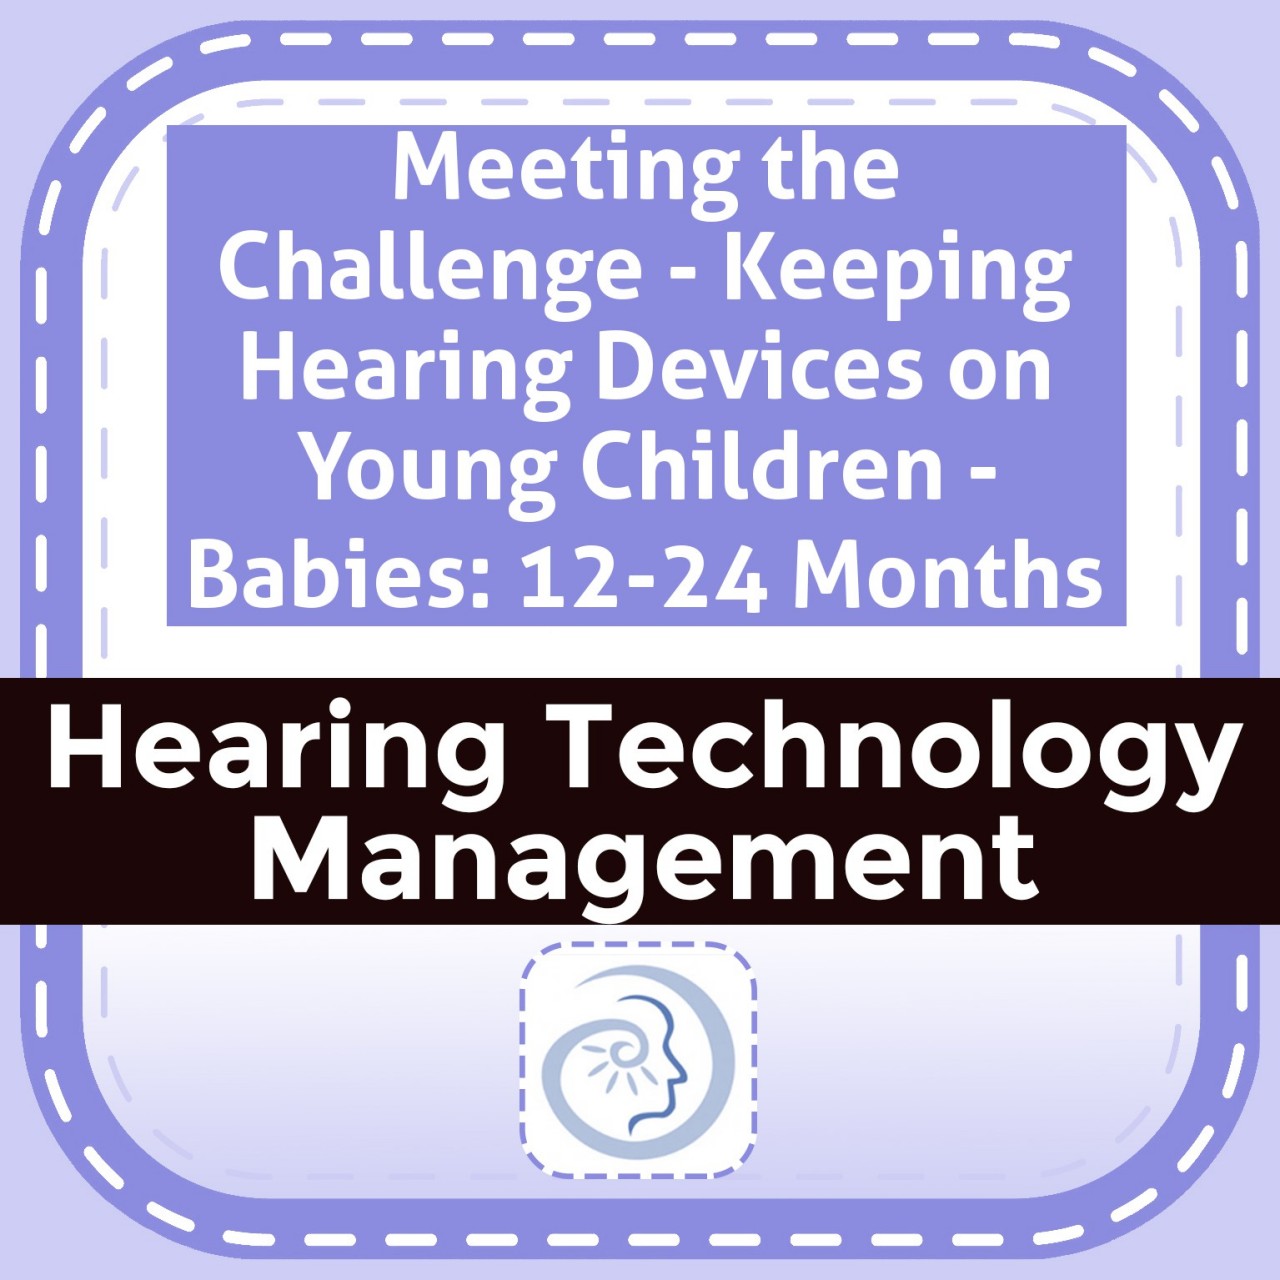 Meeting the Challenge - Keeping Hearing Devices on Young Children - Babies: 12-24 Months